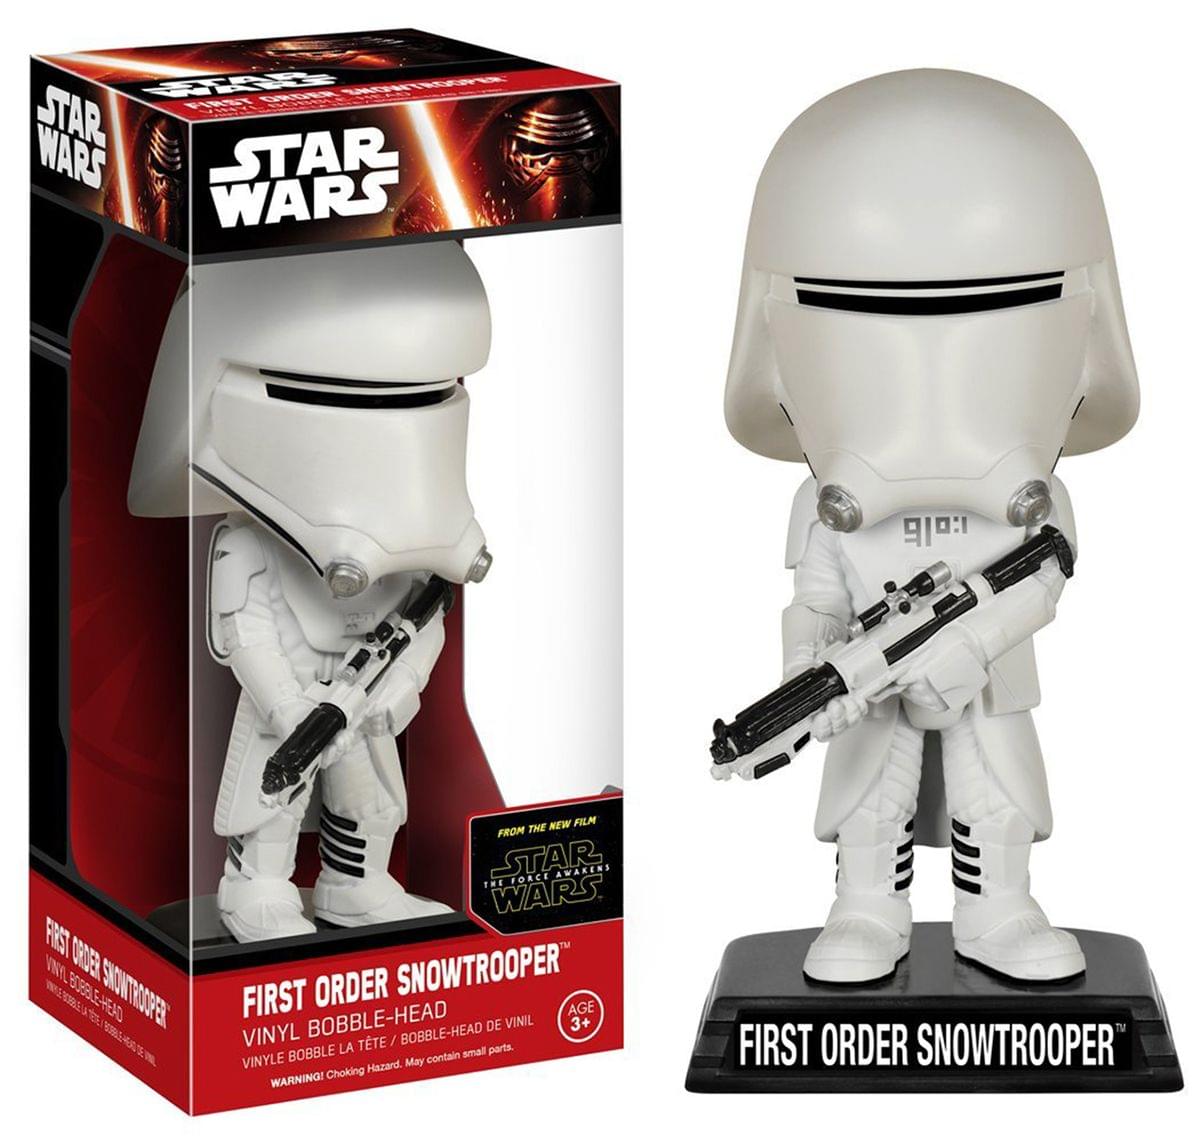 Star Wars The Force Awakens Funko Bobble Head First Order Snowtrooper